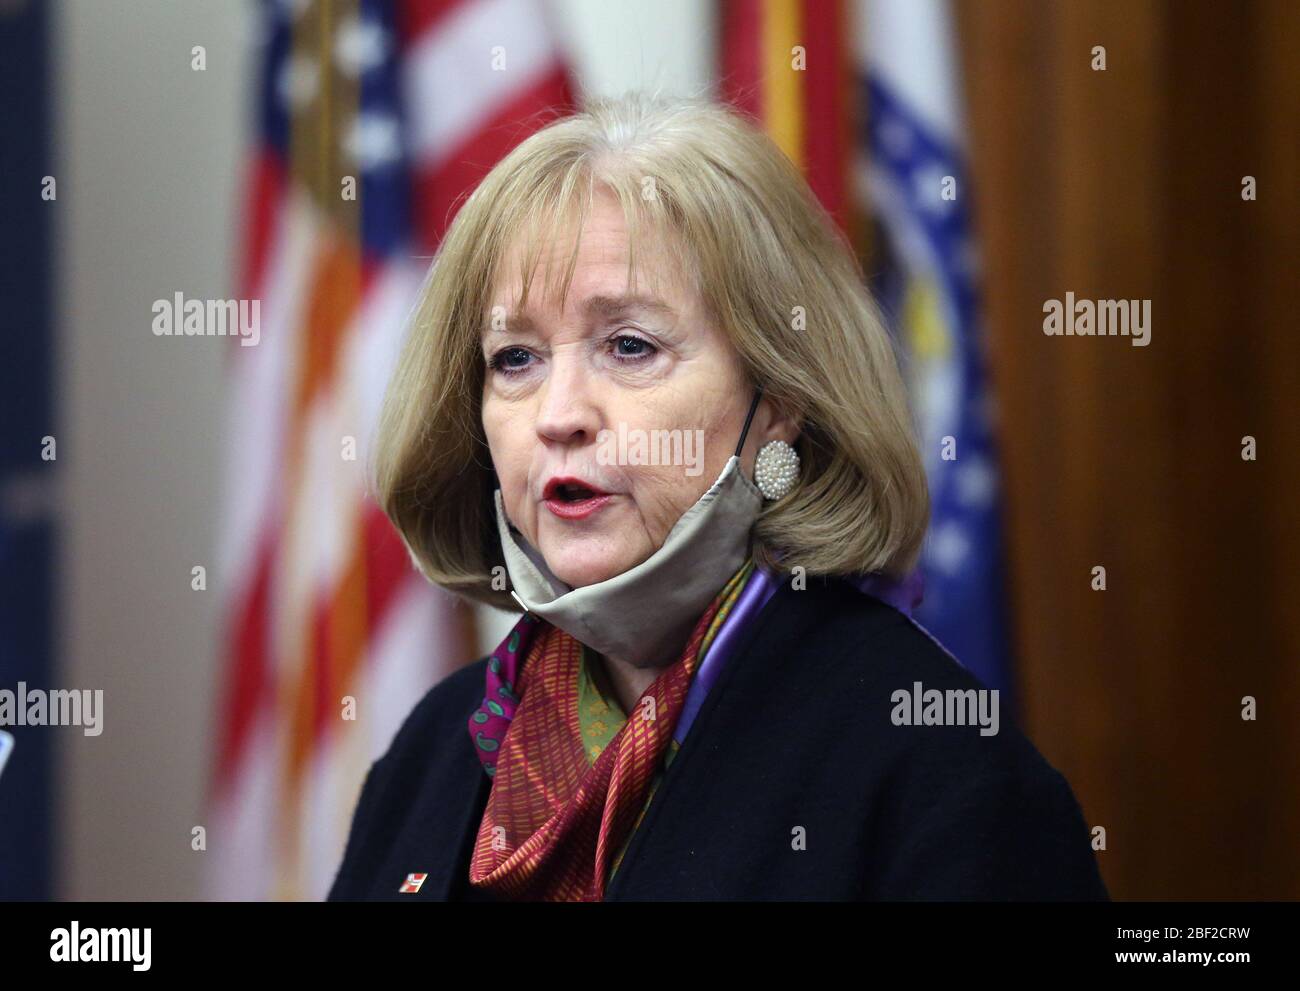 St. Louis, United States. 16th Apr, 2020. St. Louis City Mayor Lyda Krewson speaks to reporters during a press conference at City Hall in St. Louis on Thursday, April 16, 2020. Krewson announced an extension of the stay-at-home order and it will stay in effect indefinitely. Krewson said they will reevaluate the order in the next two or three weeks. Currently, St. Louis City has 743 cases of coronavirus and 27 deaths, as a result. Photo by Bill Greenblatt/UPI Credit: UPI/Alamy Live News Stock Photo